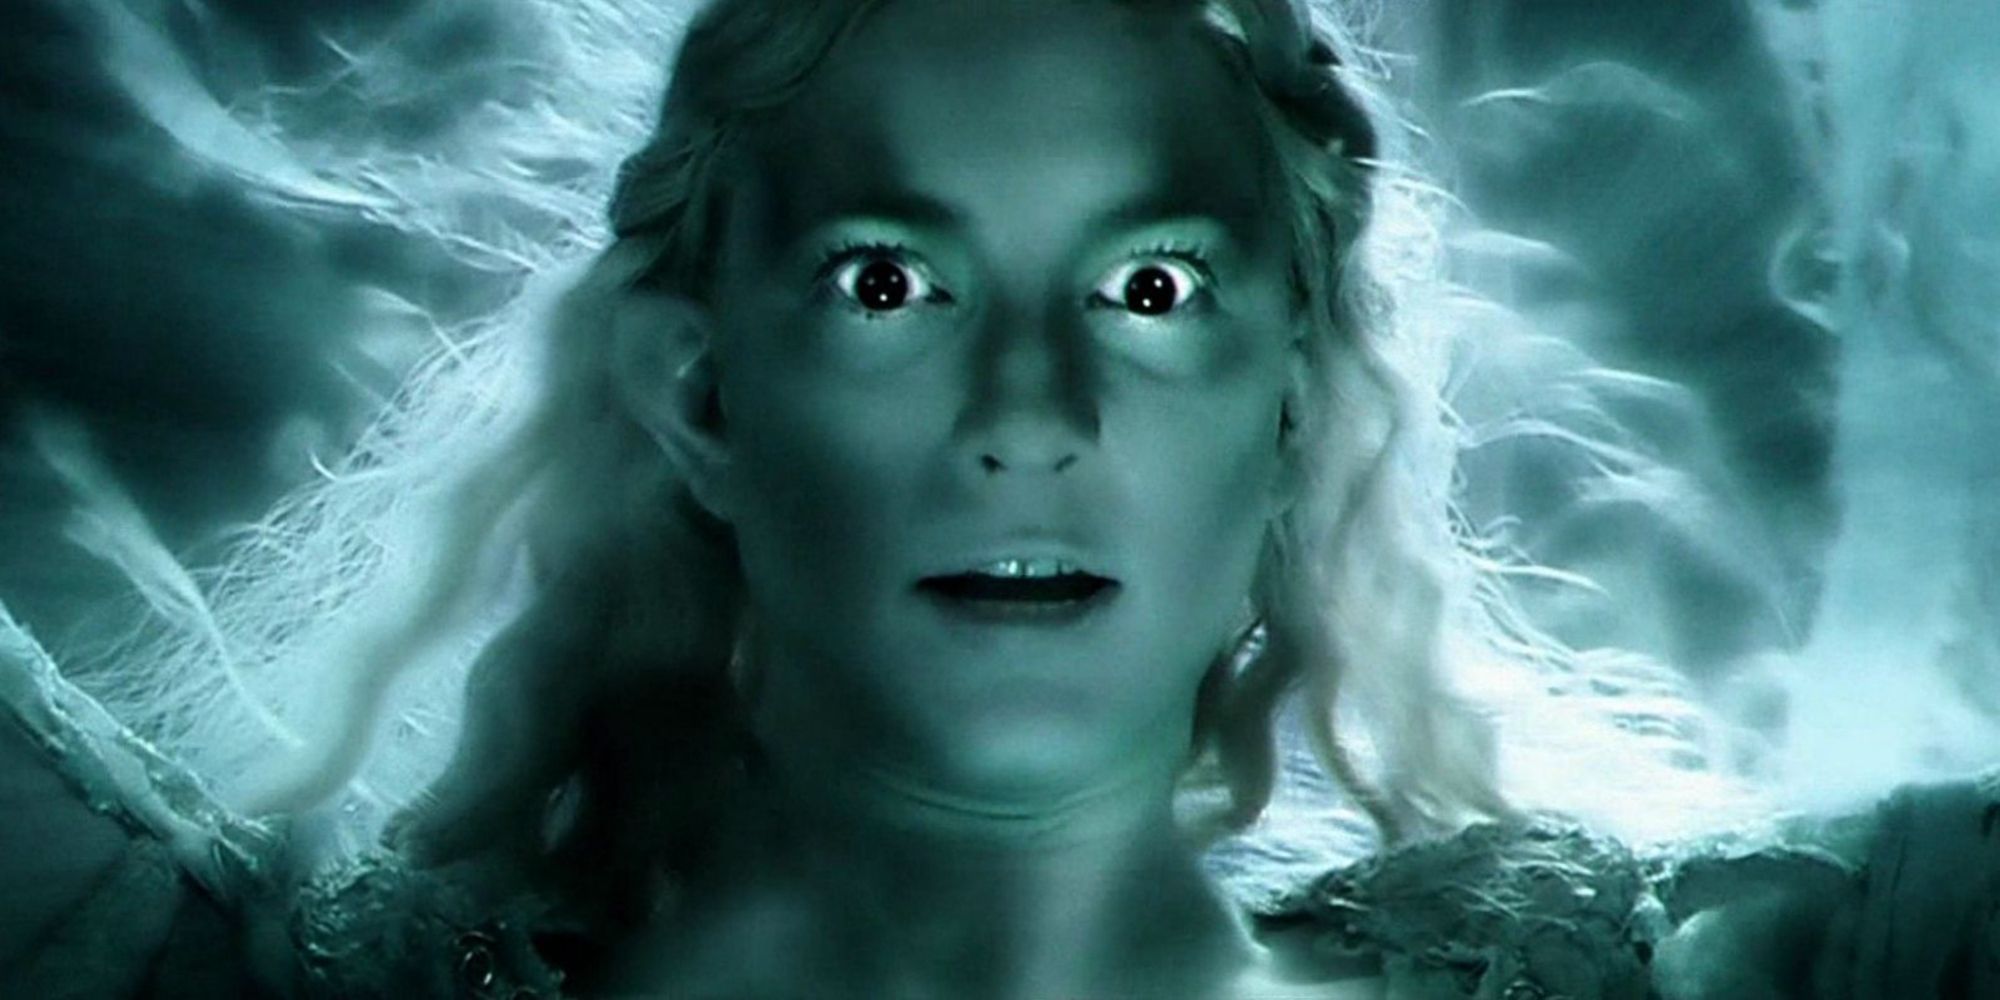 Galadriel as she's offered the one ring in Lord of the Rings